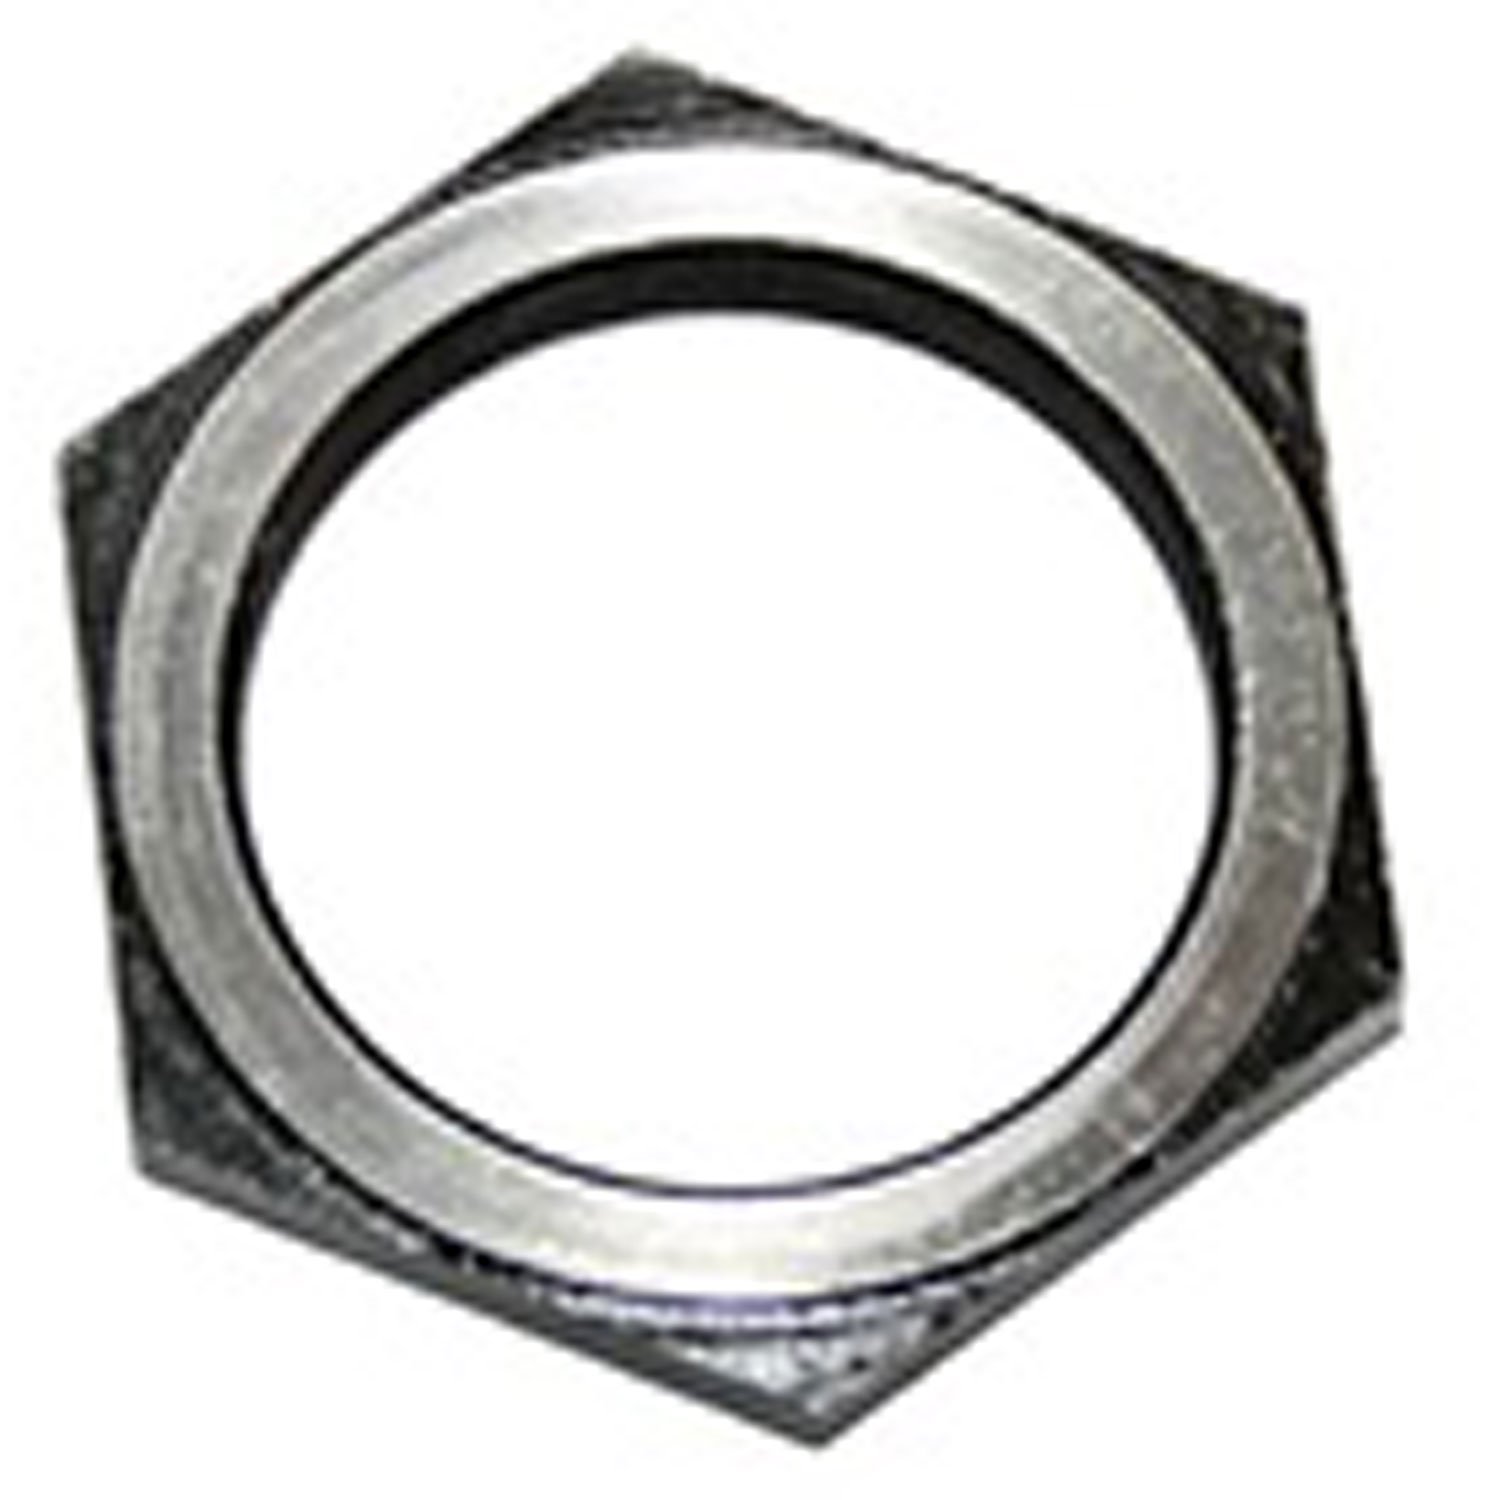 This wheel bearing nut from Omix-ADA for Dana 27 rear axle found in 41-45 Ford GPWs and Willys MBs.